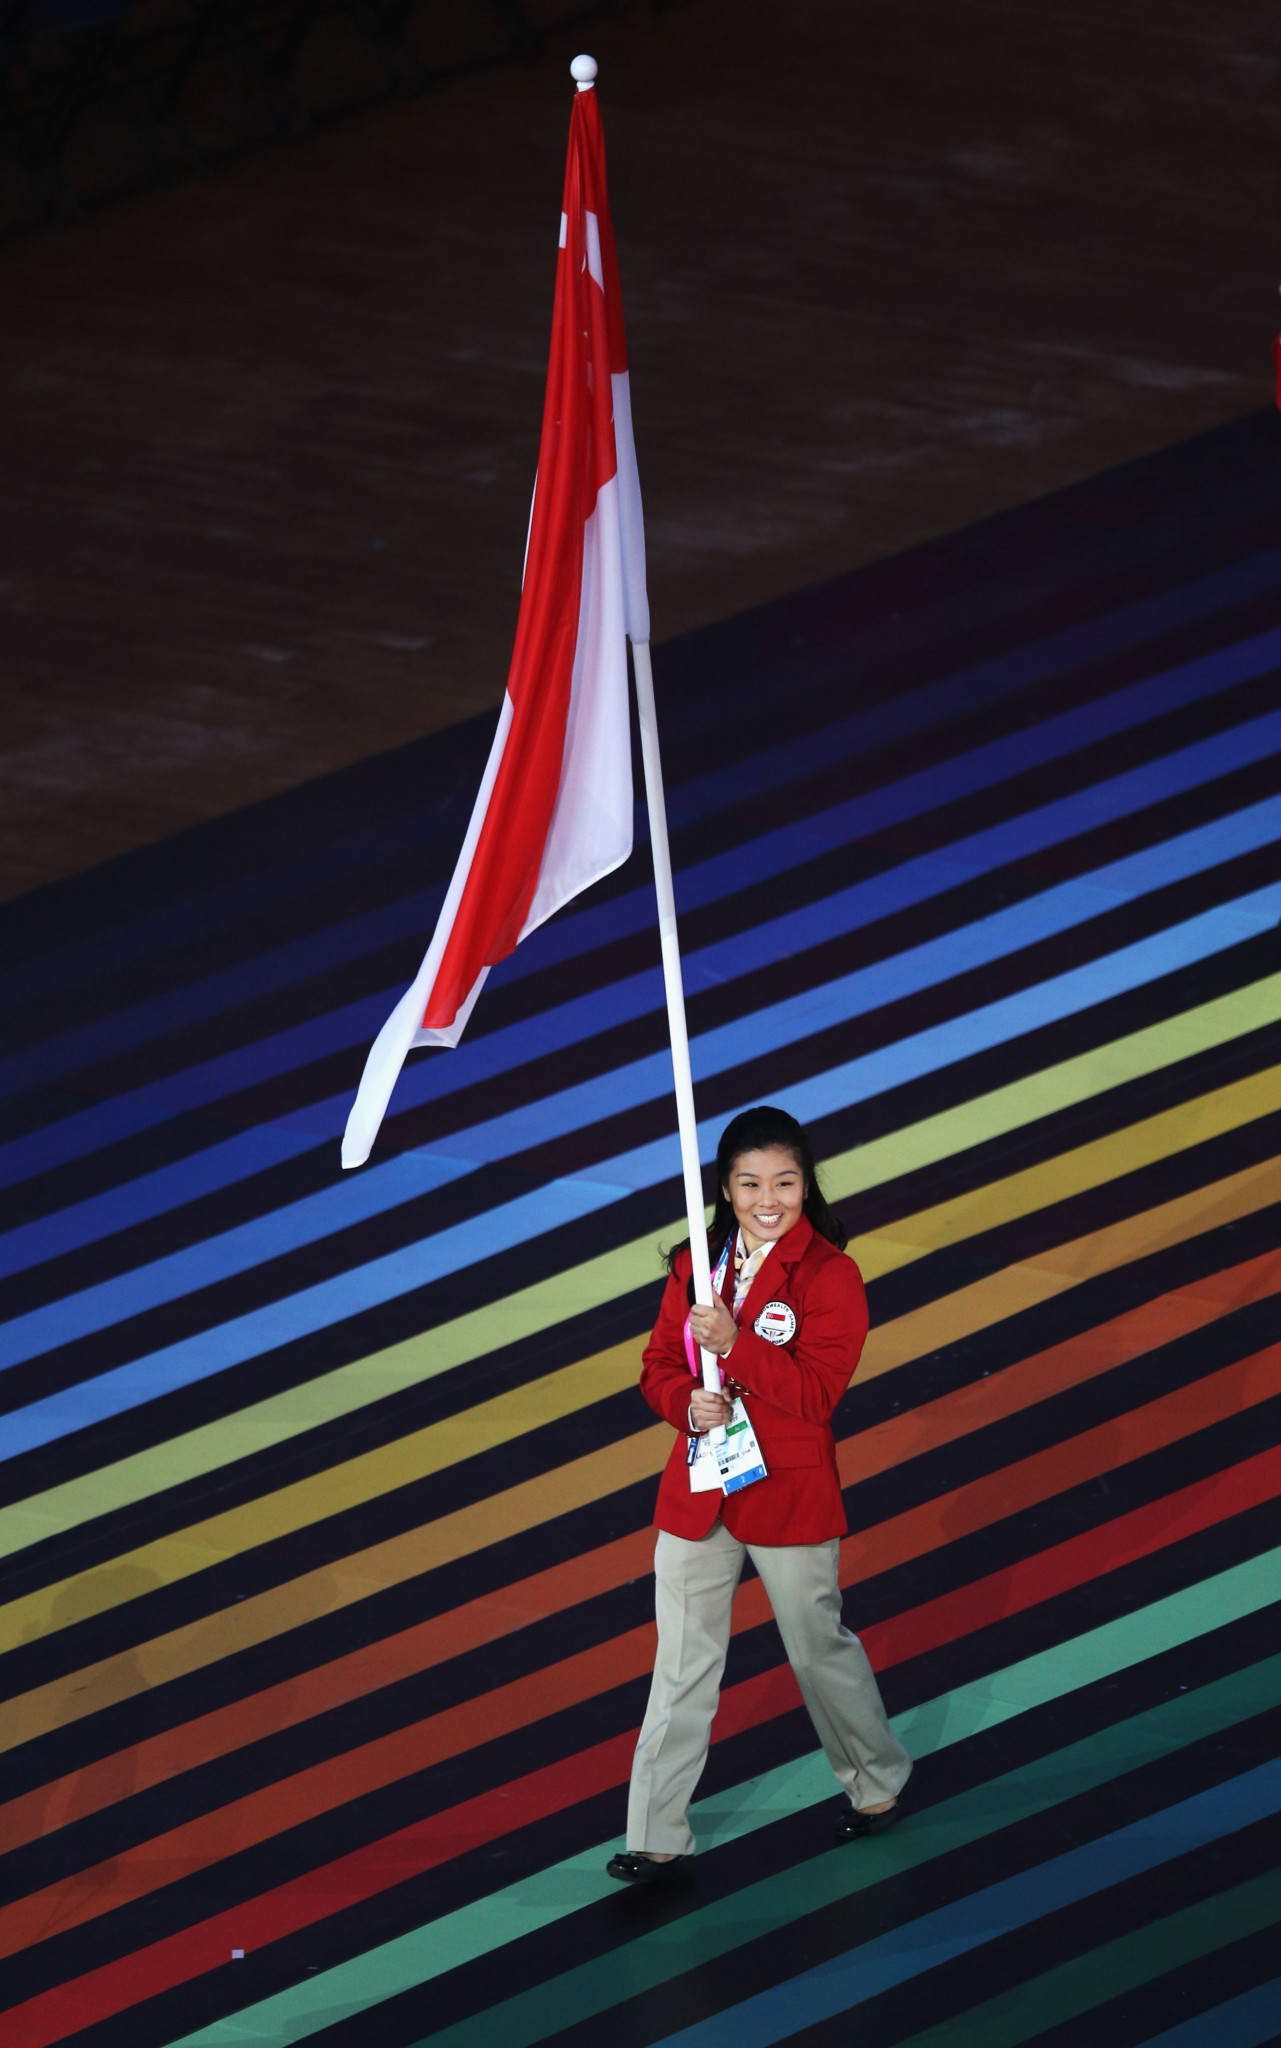 Lim Heem Wei carrying the Singapore flag at the Glasgow 2014 Opening Ceremony ©Getty Images